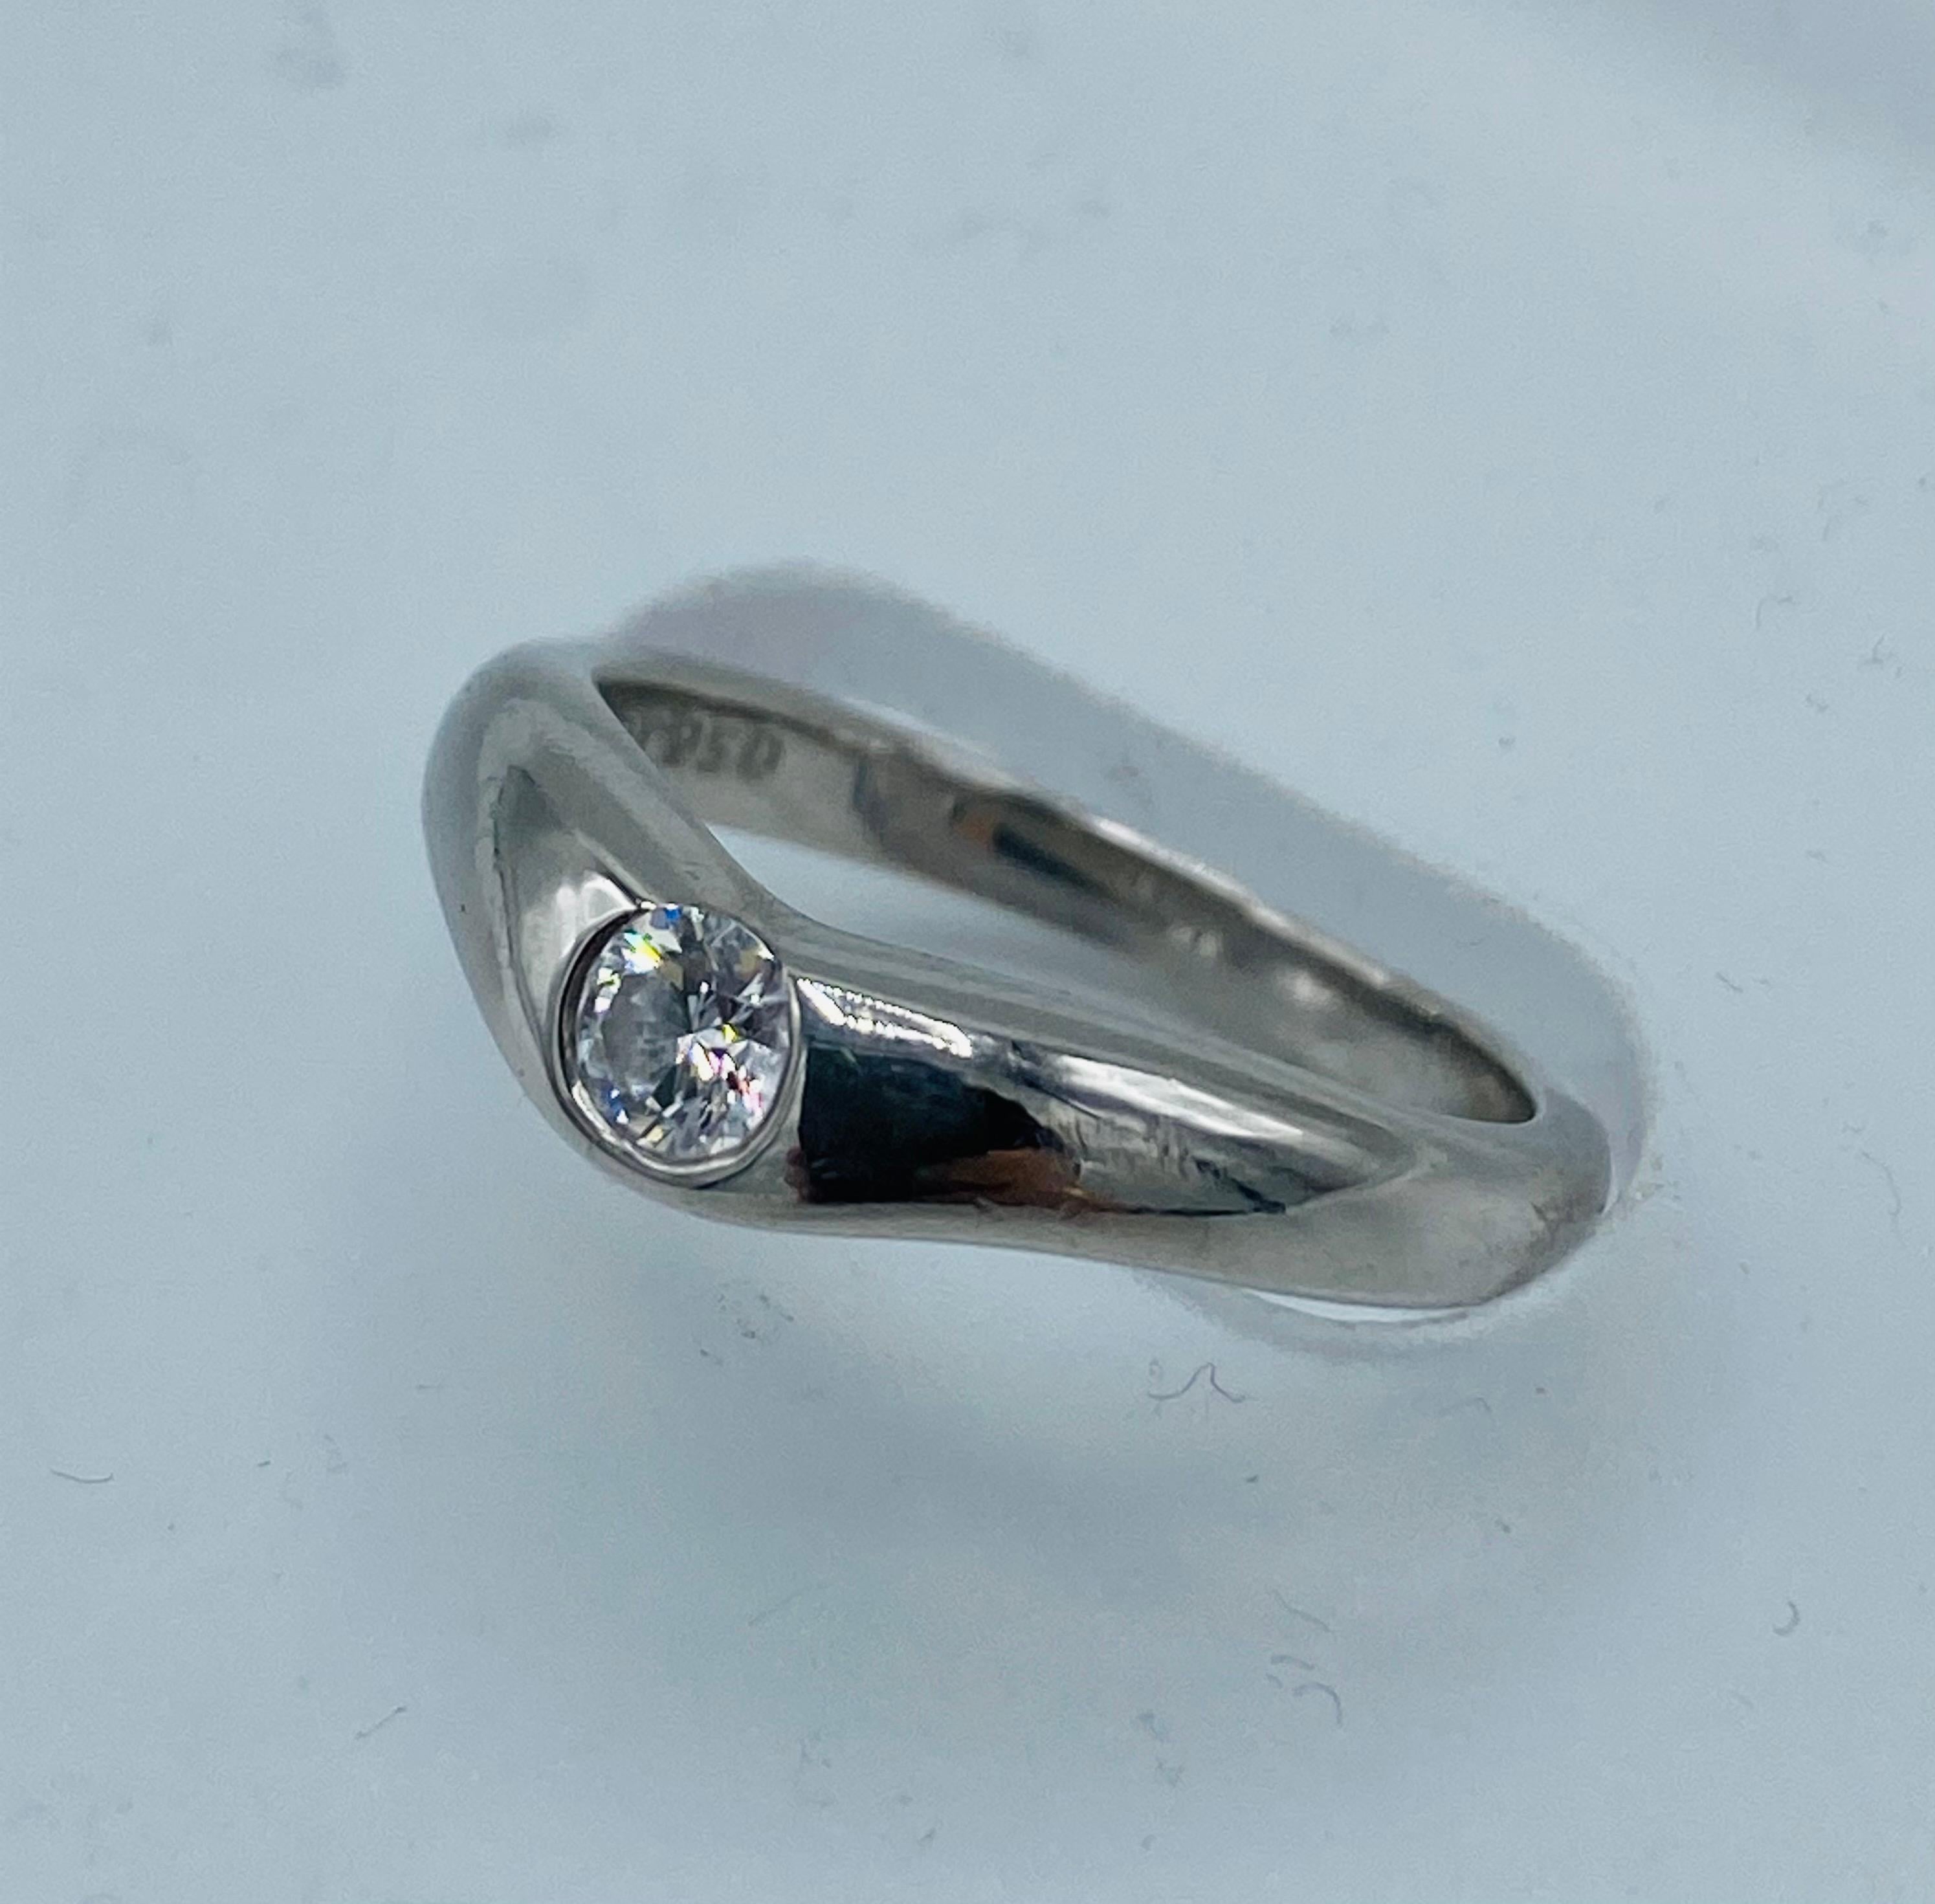 Product details:

The ring is designed by Elsa Peretti for Tiffany and Company. It is made out of 950 Platinum and approximately 0.20 cts. of round brilliant cut diamond.
the ring is signed Peretti Tiffany & Co. and it is stumped with PT. 950.
Total